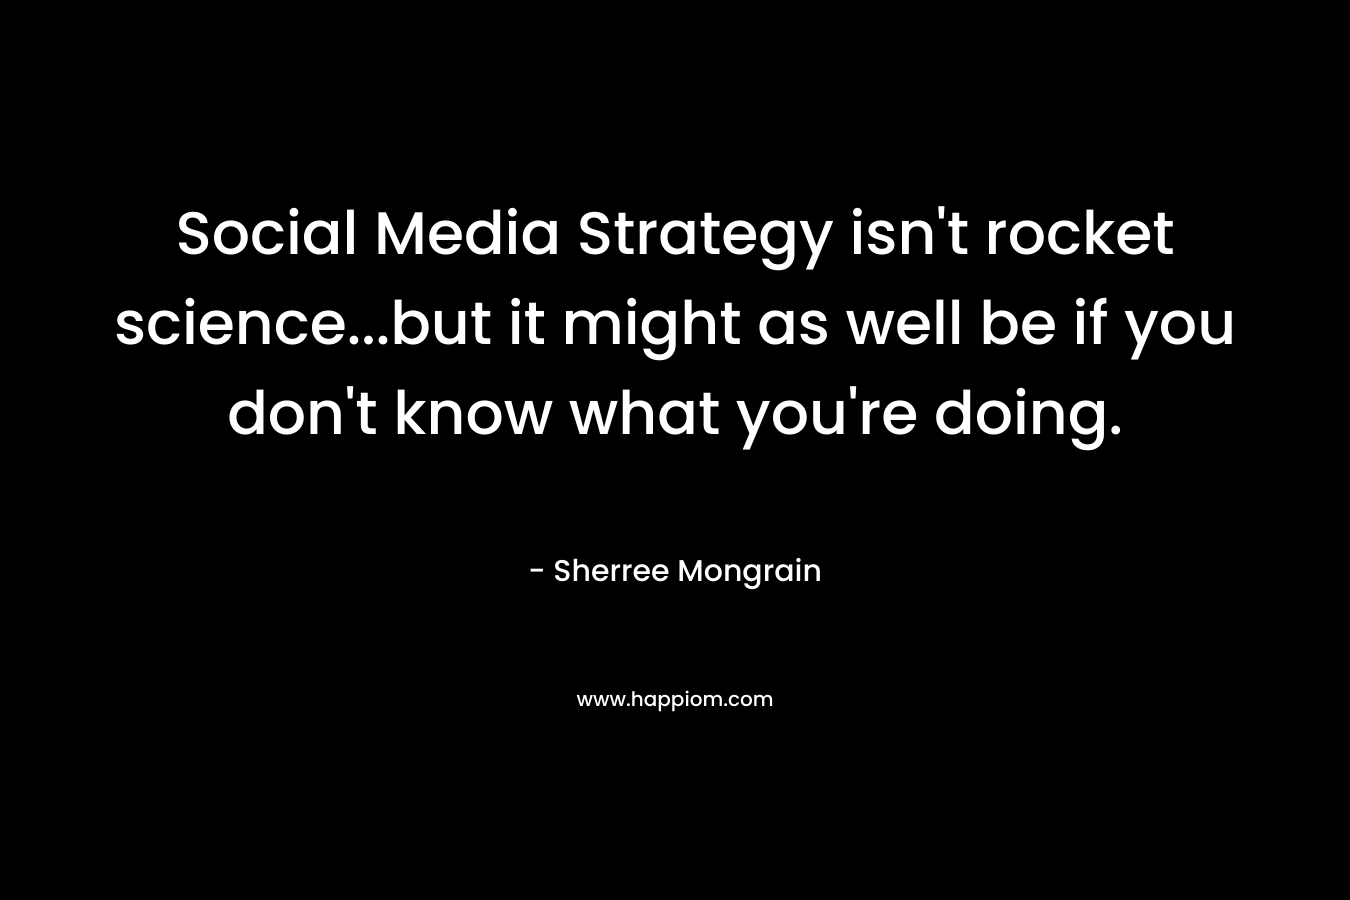 Social Media Strategy isn't rocket science...but it might as well be if you don't know what you're doing.